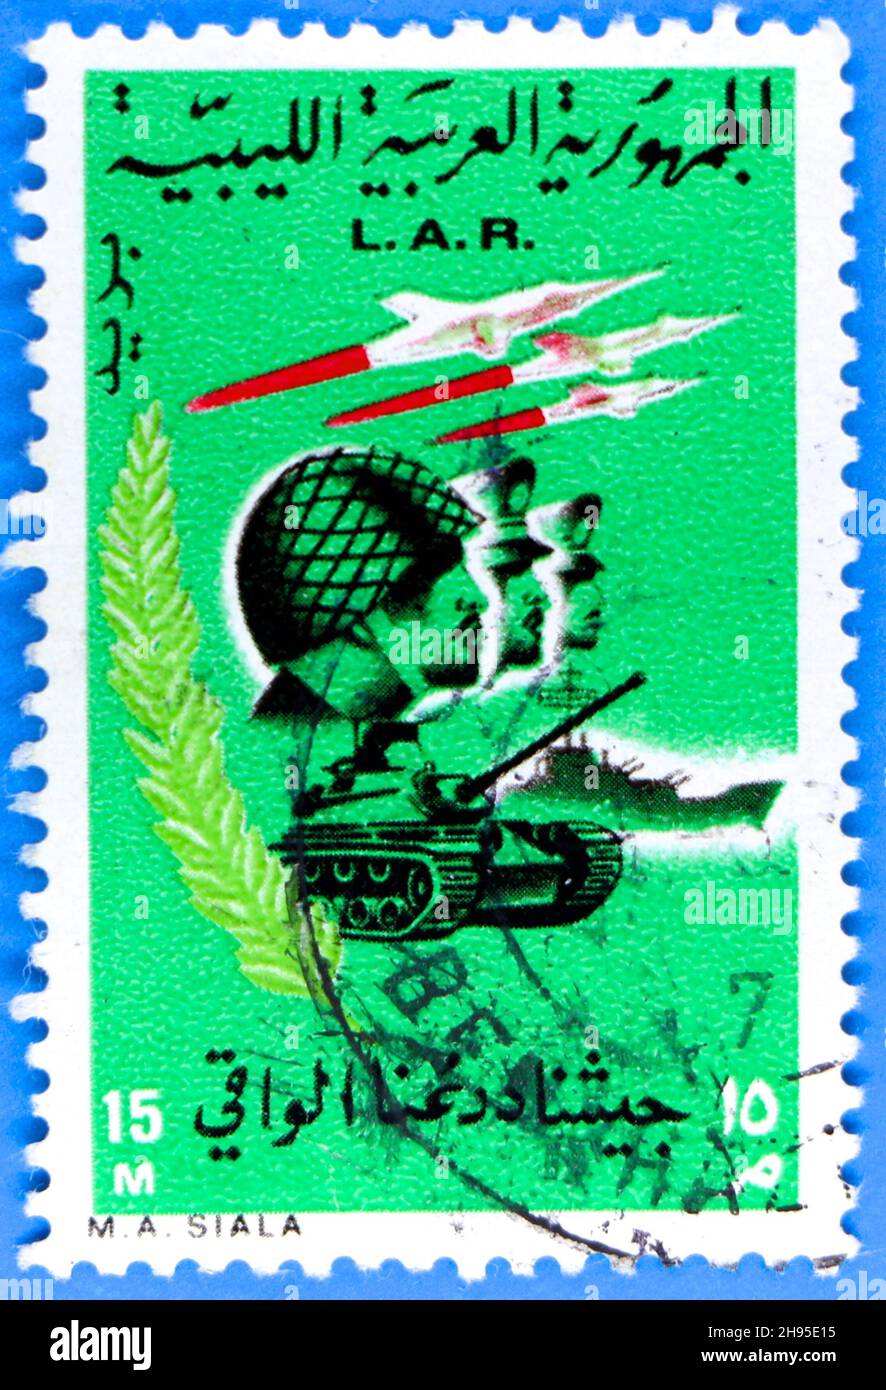 Photo of a green Libyan Arab Republic postage stamp featuring military graphics to celebrate the revolution in 1969 Stock Photo